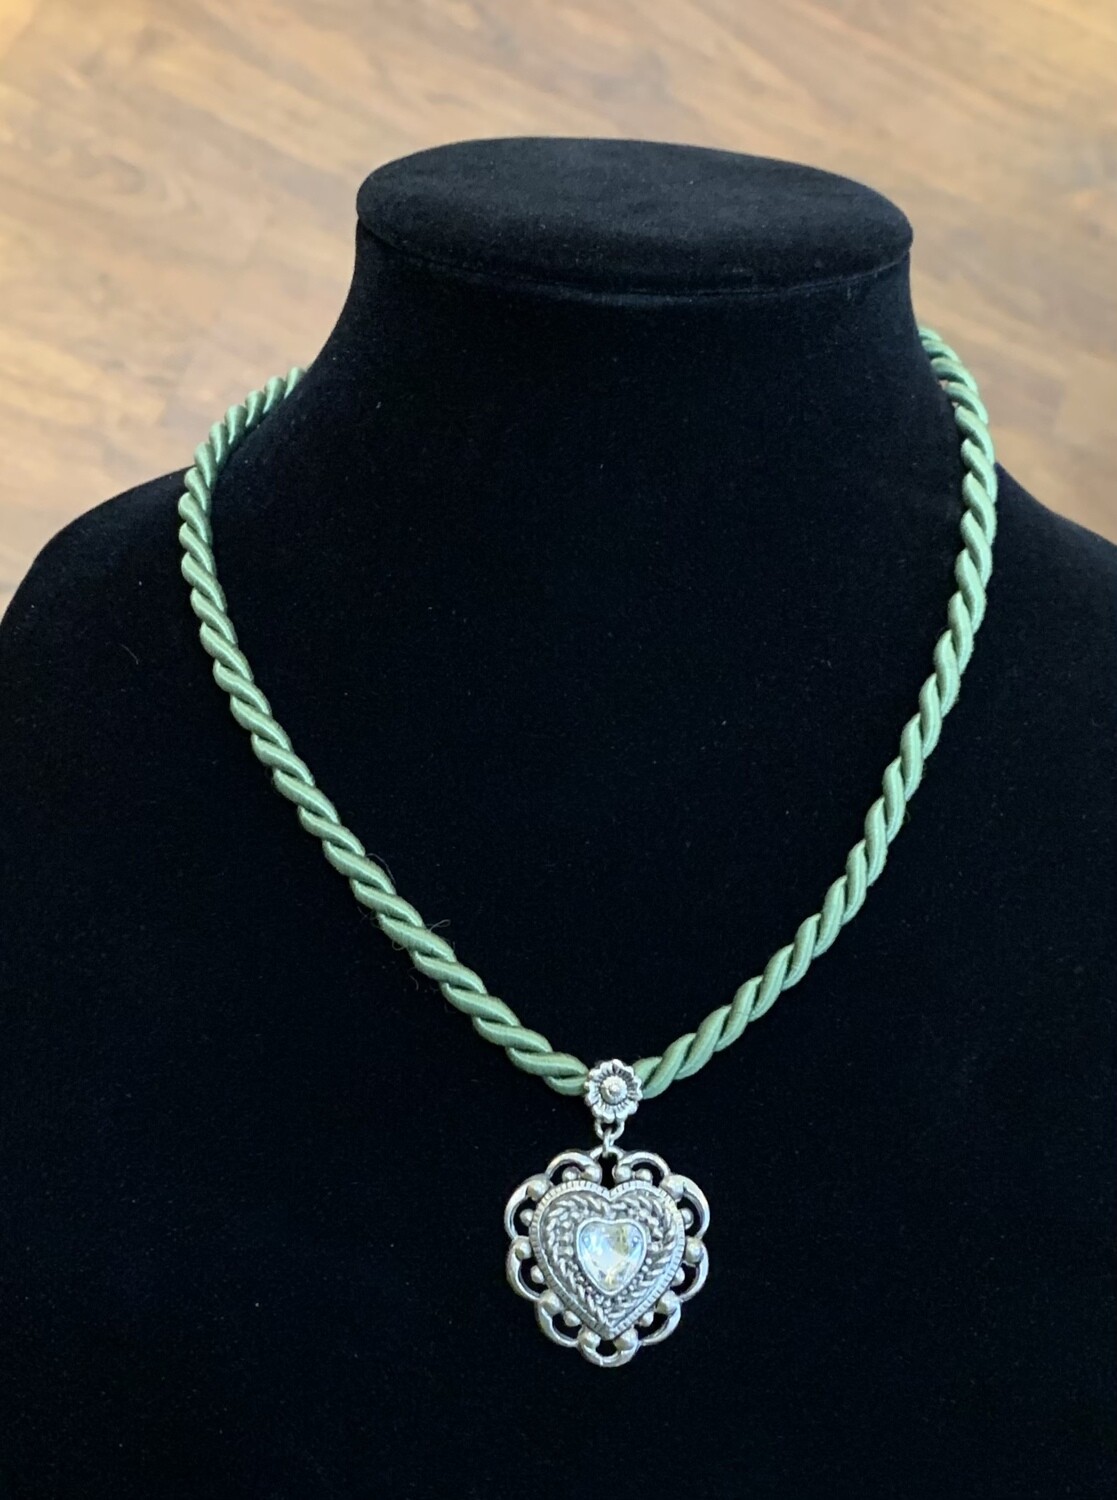 Green Rope Braided Chain Necklace With Silver Heart Pendant